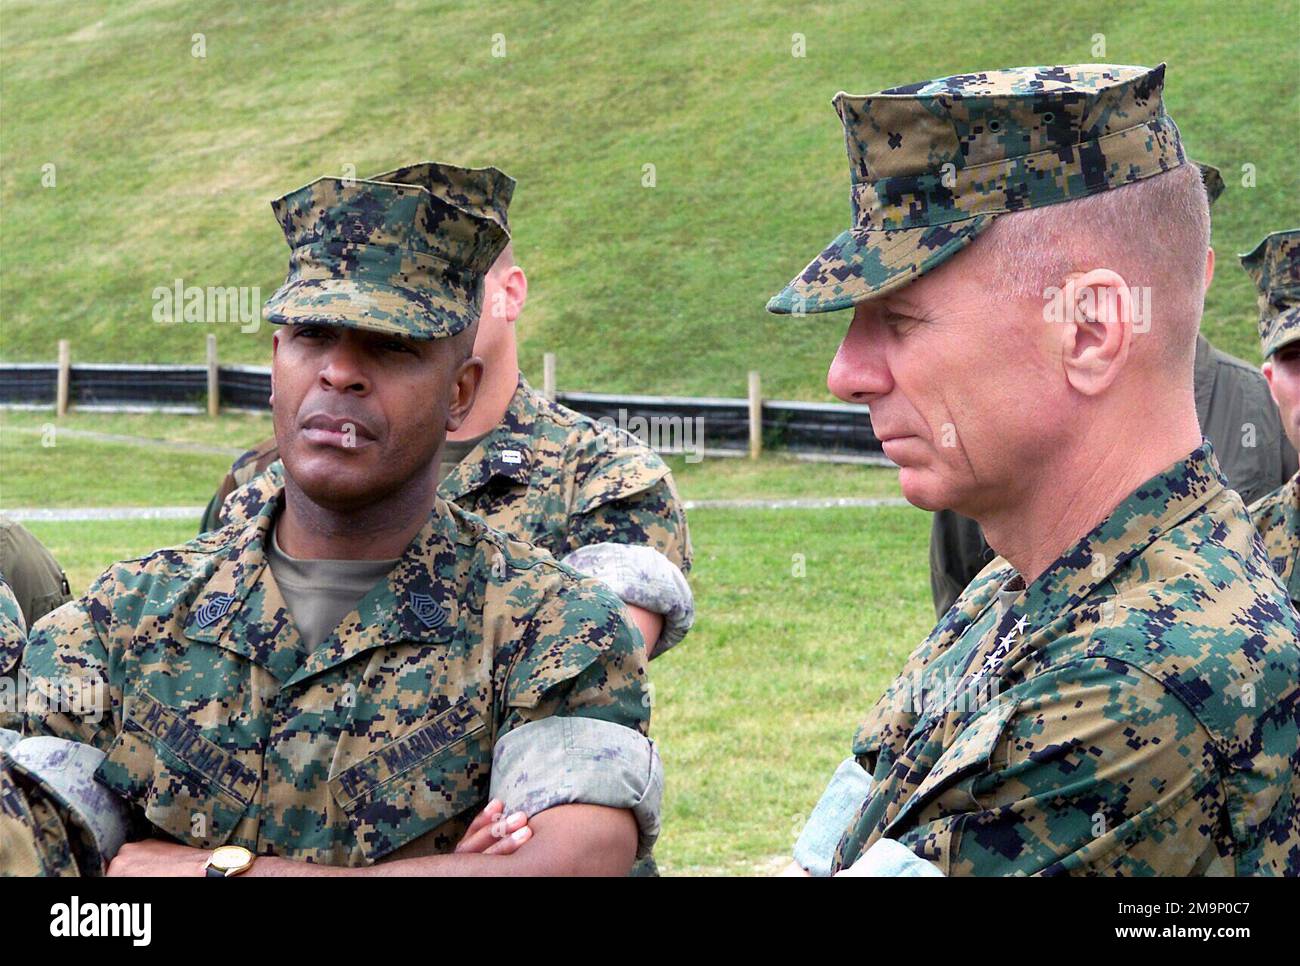 Sergeant Major of the Marine Corps Alford McMichael, (left), and General (GEN) Michael W. Hagee, (right), Commandant of the Marine Corps (CMC) listen to a briefing during a visit to range 10 at Fuel Pits LZ located on Camp Schwab, Okinawa, Japan. GEN Hagee visited III Marine Expeditionary Force (MEF) for the first time as the CMC. During his visit he will tour Marine bases located on Okinawa, Japan. Base: Camp Schwab Country: Japan (JPN) Scene Major Command Shown: HQMC Stock Photo